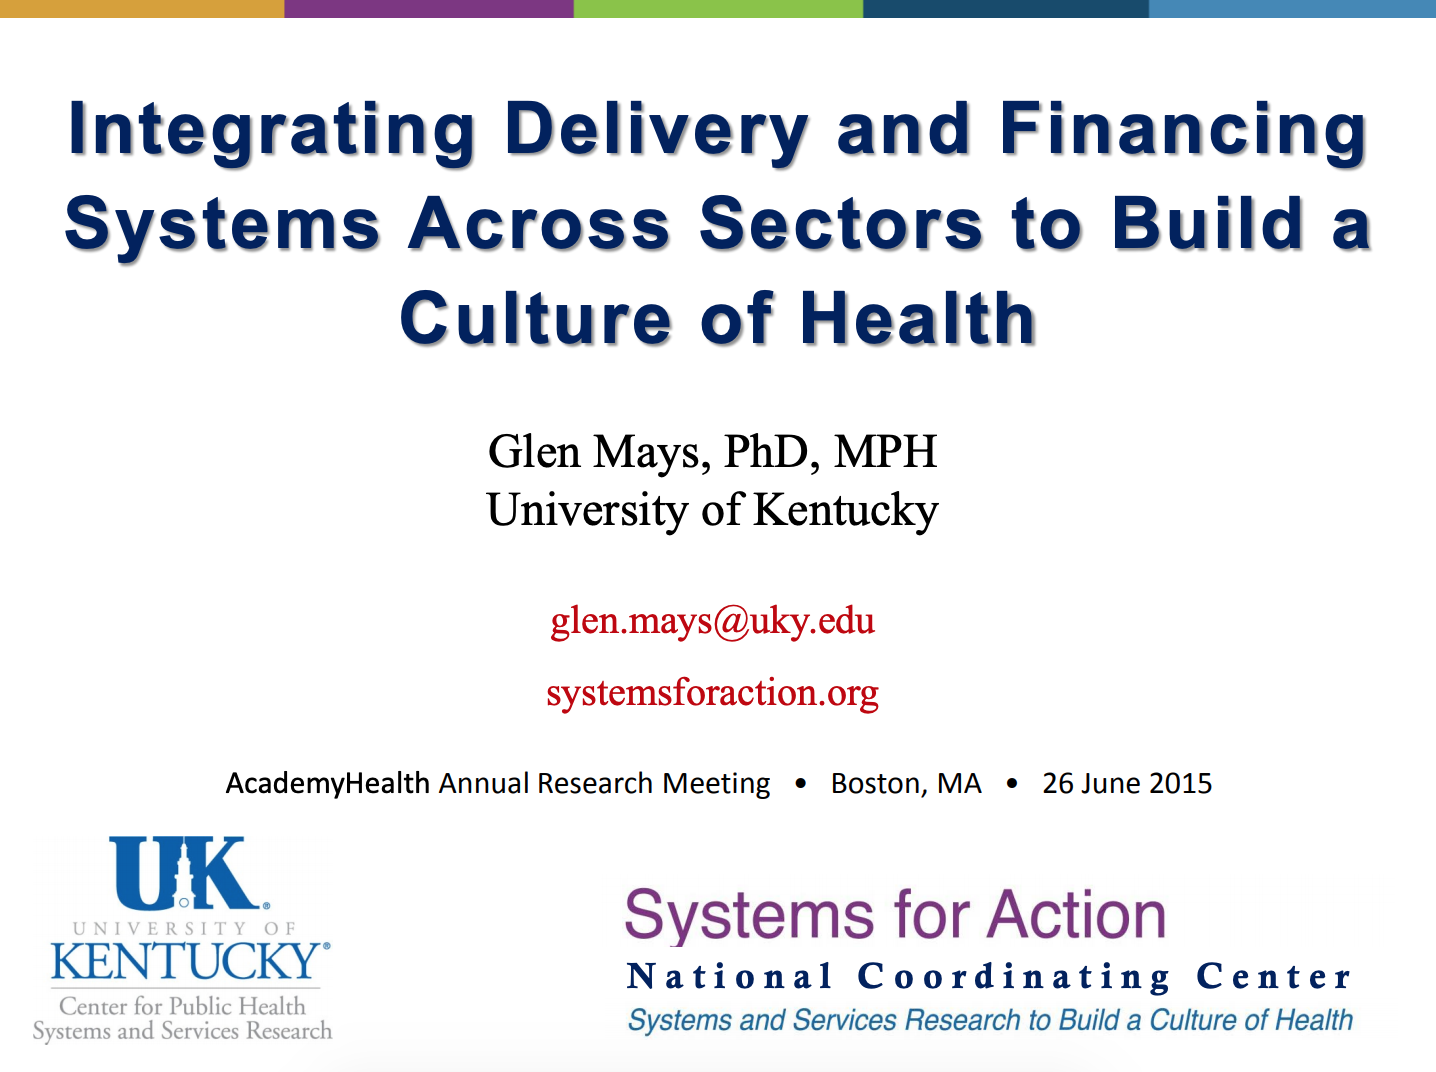 Integrating Delivery and Financing Systems Across Sectors to Build a Culture of Health